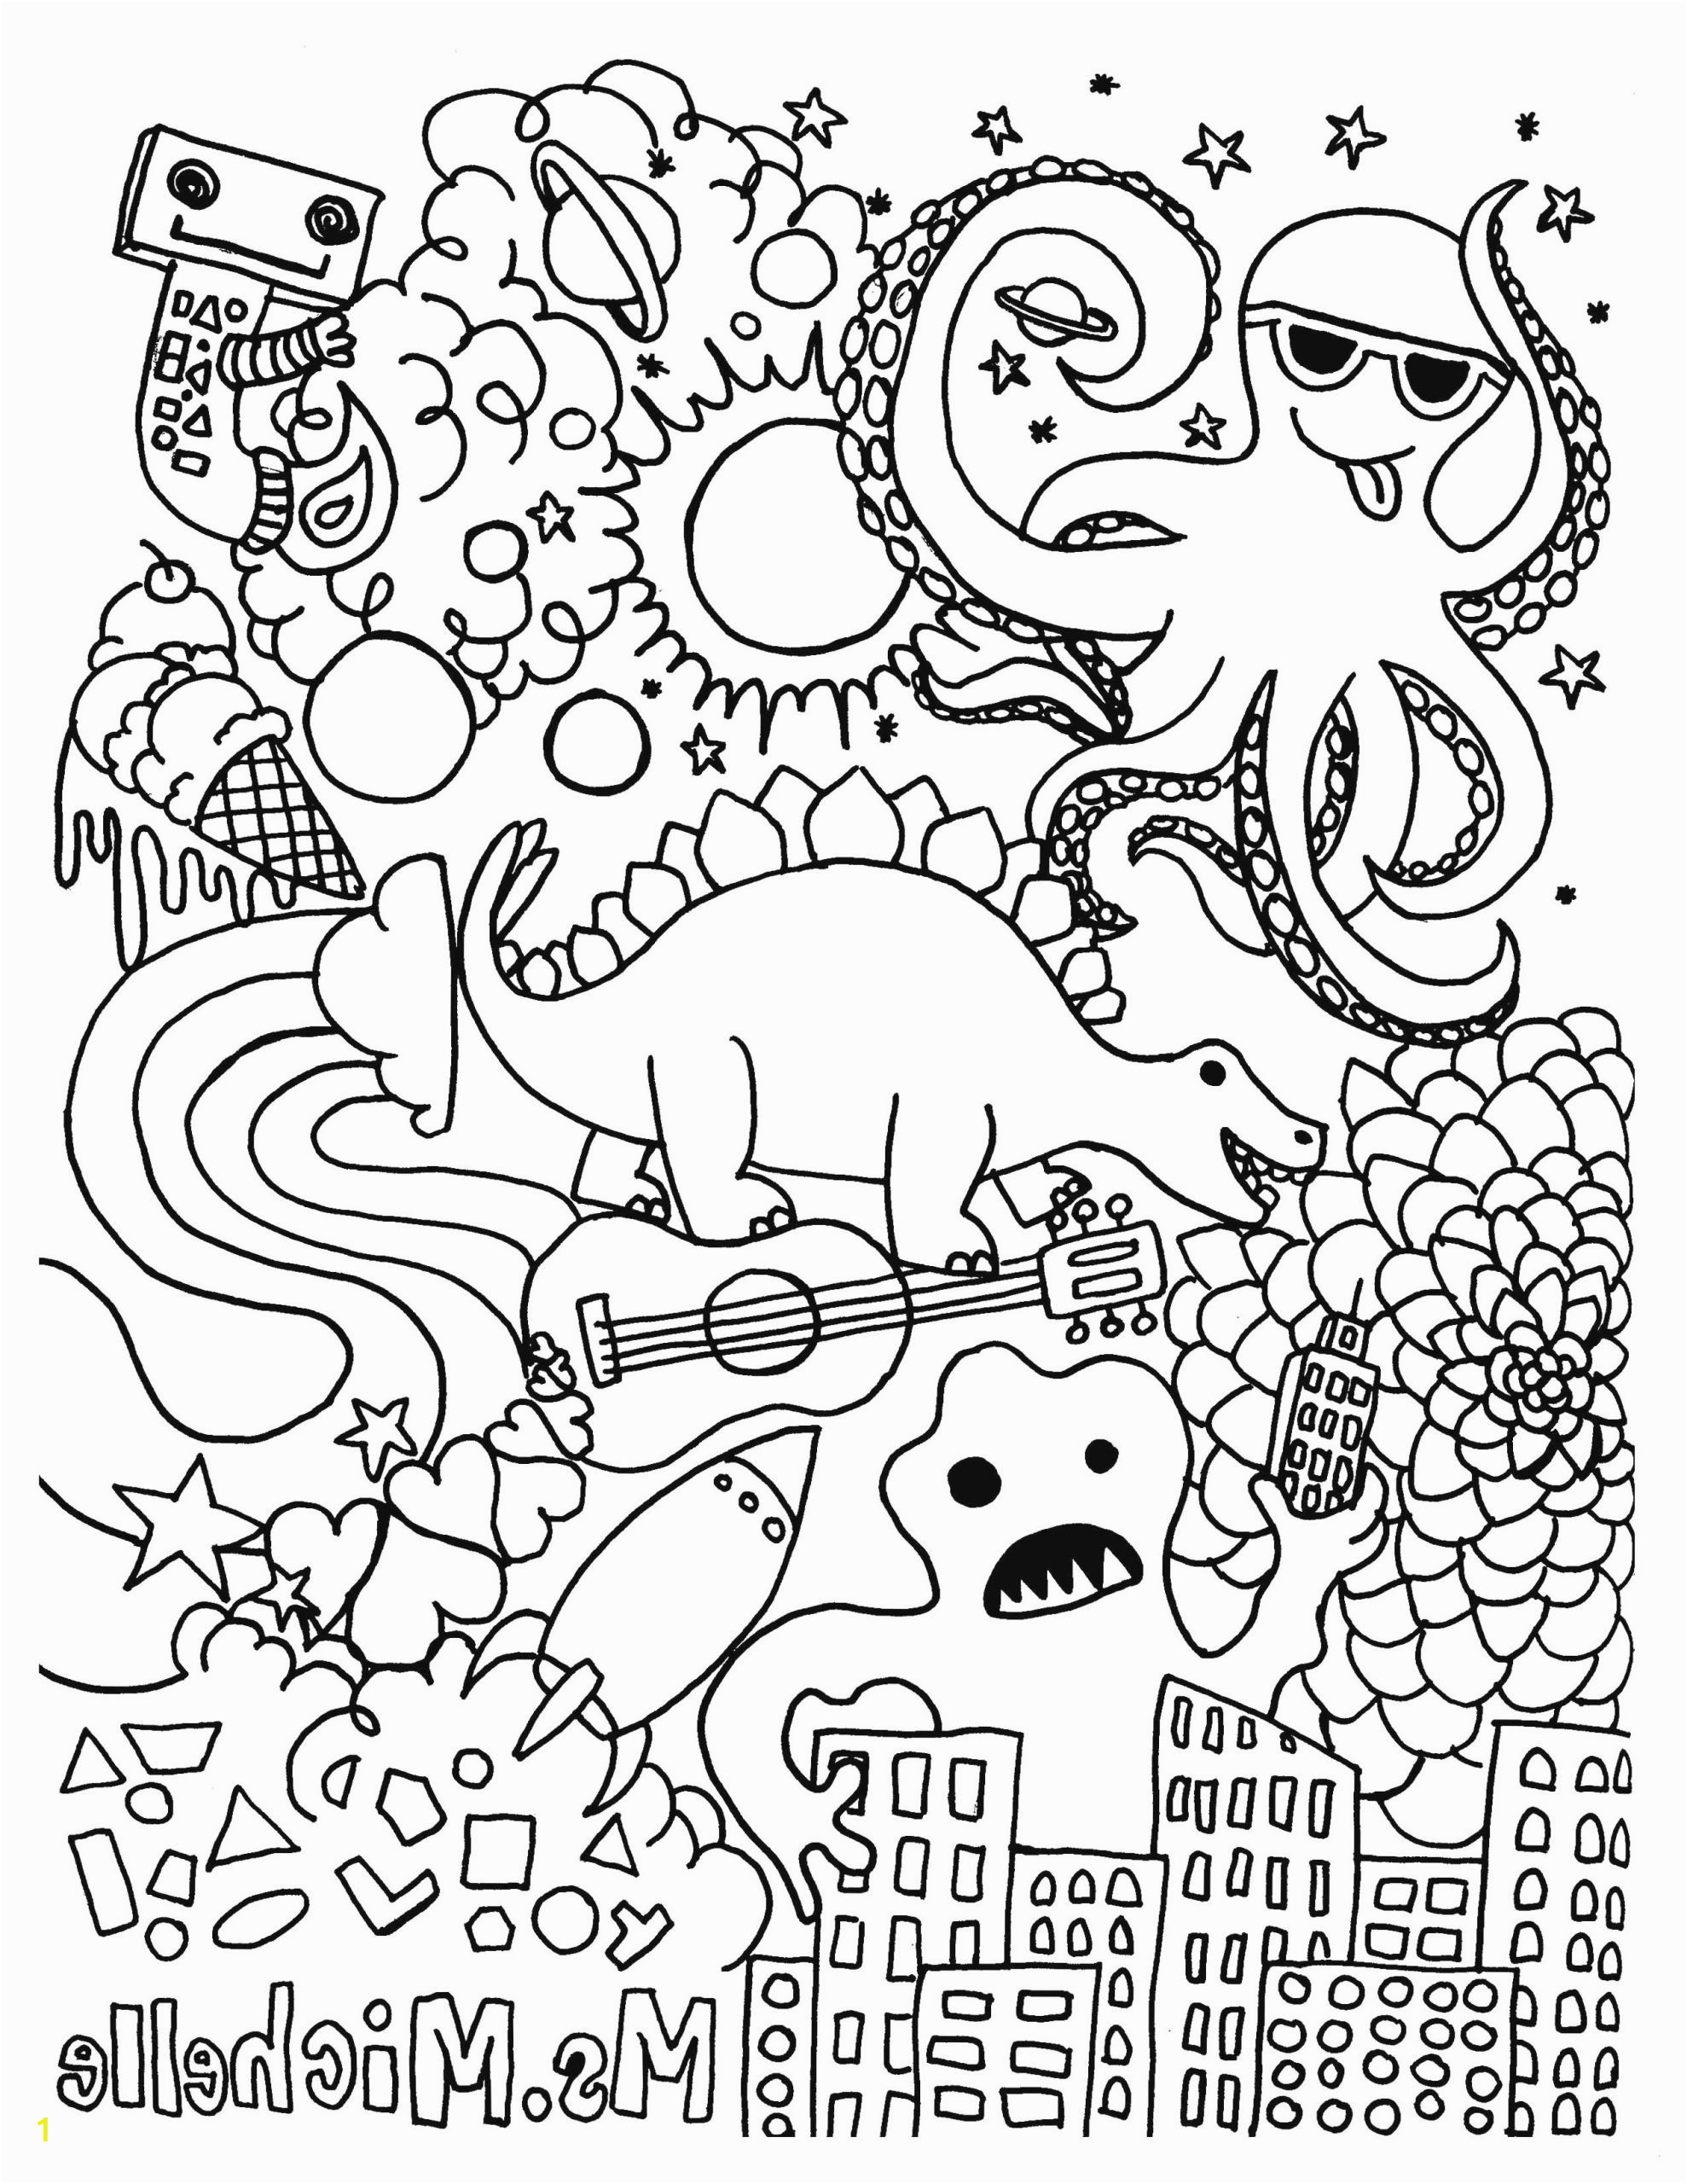 Free Printable Yoga Coloring Pages Coloring Pages Free Printable Coloring Sheets Free